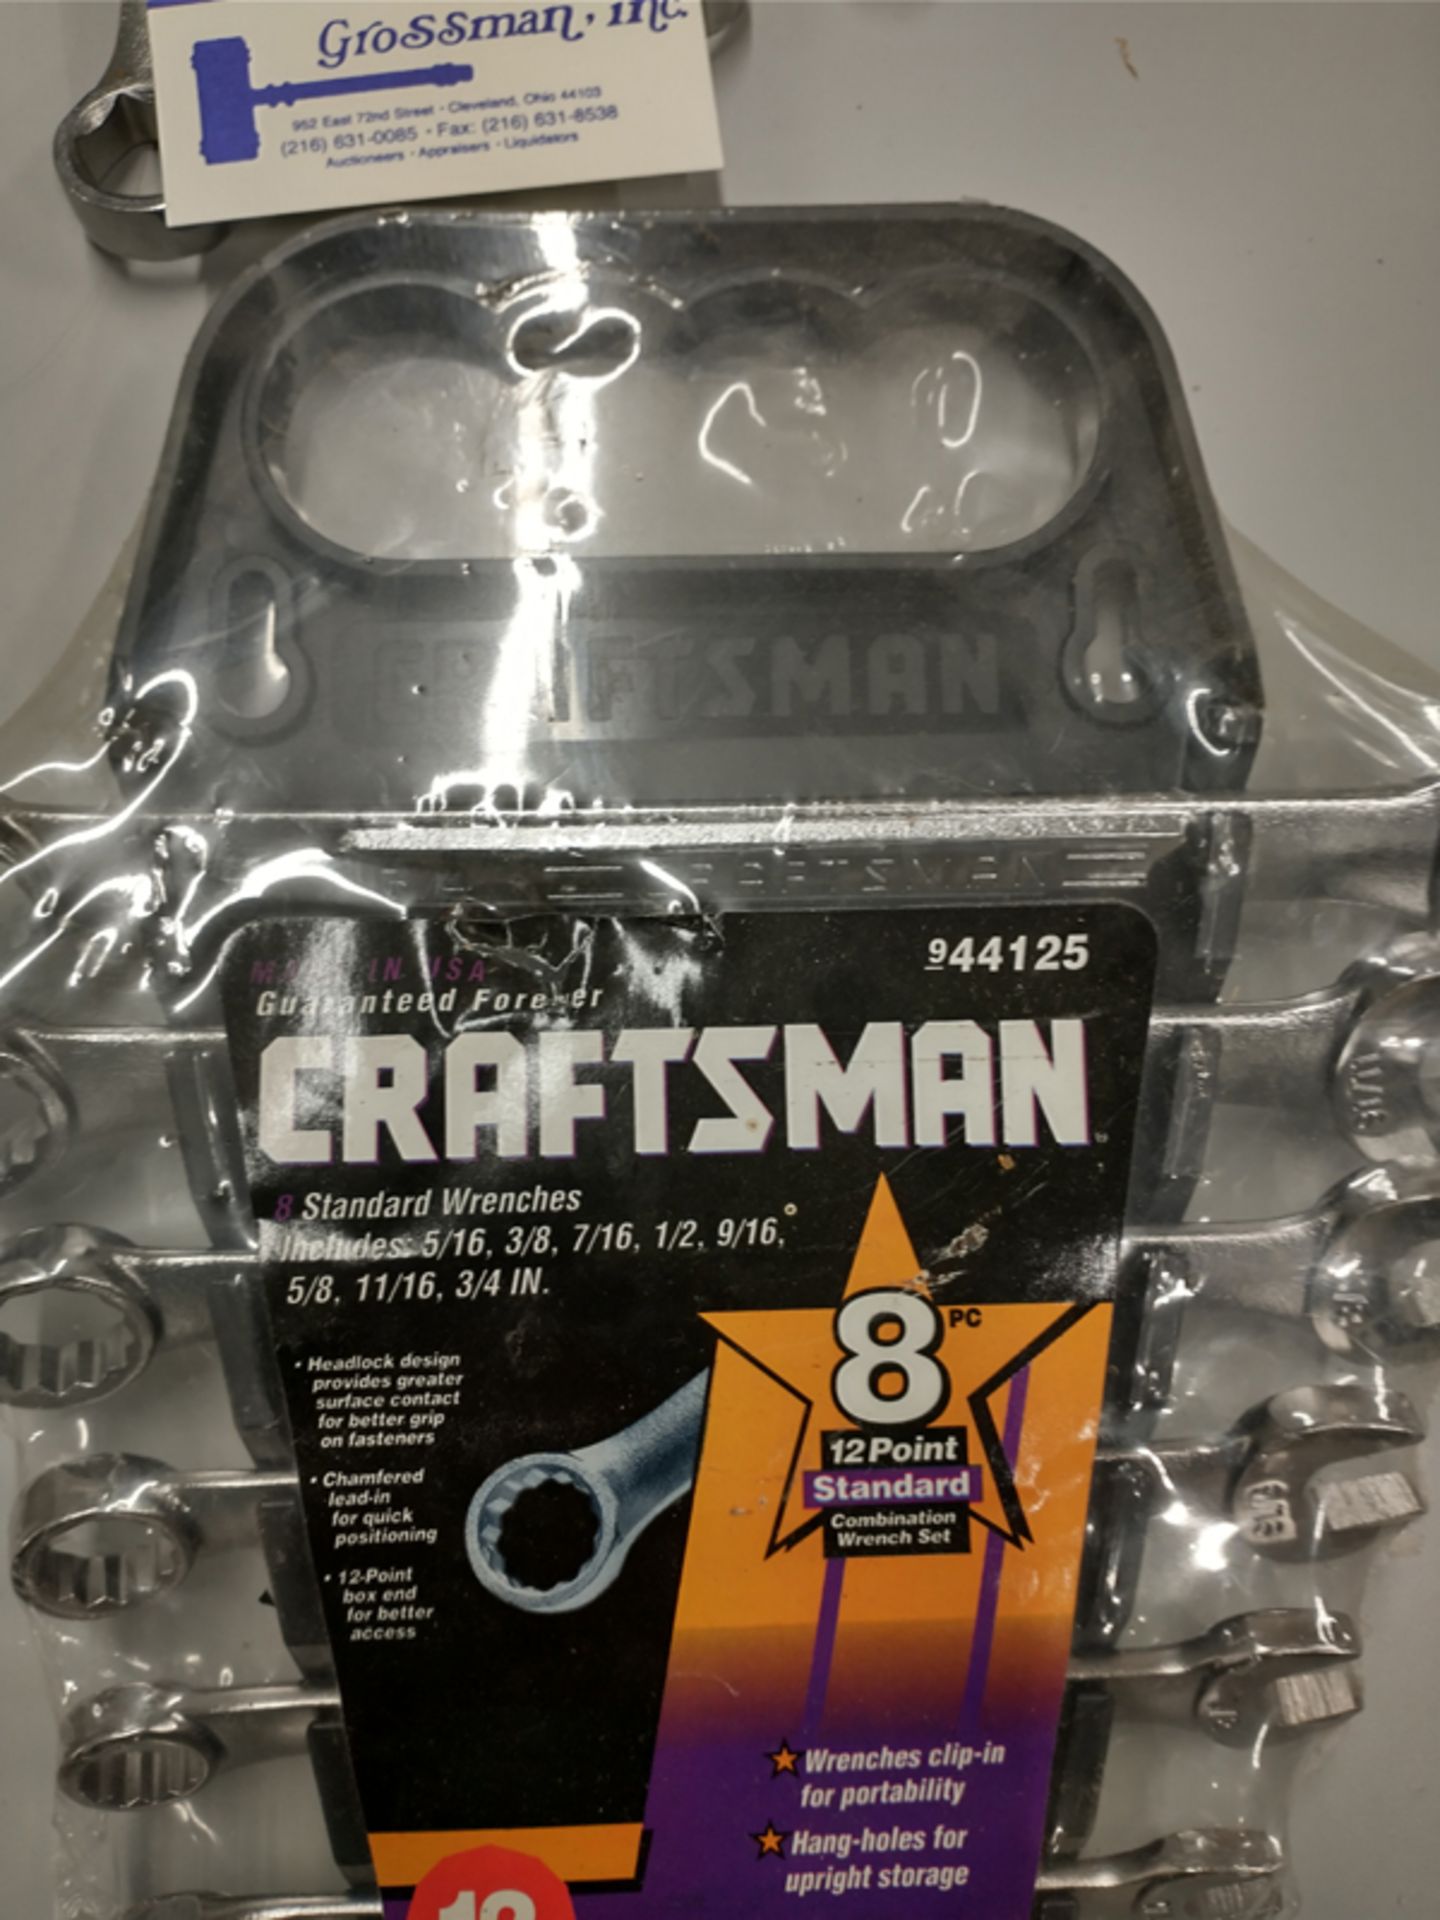 2 SETS OF CRAFTSMAN WRENCHES - Image 2 of 4